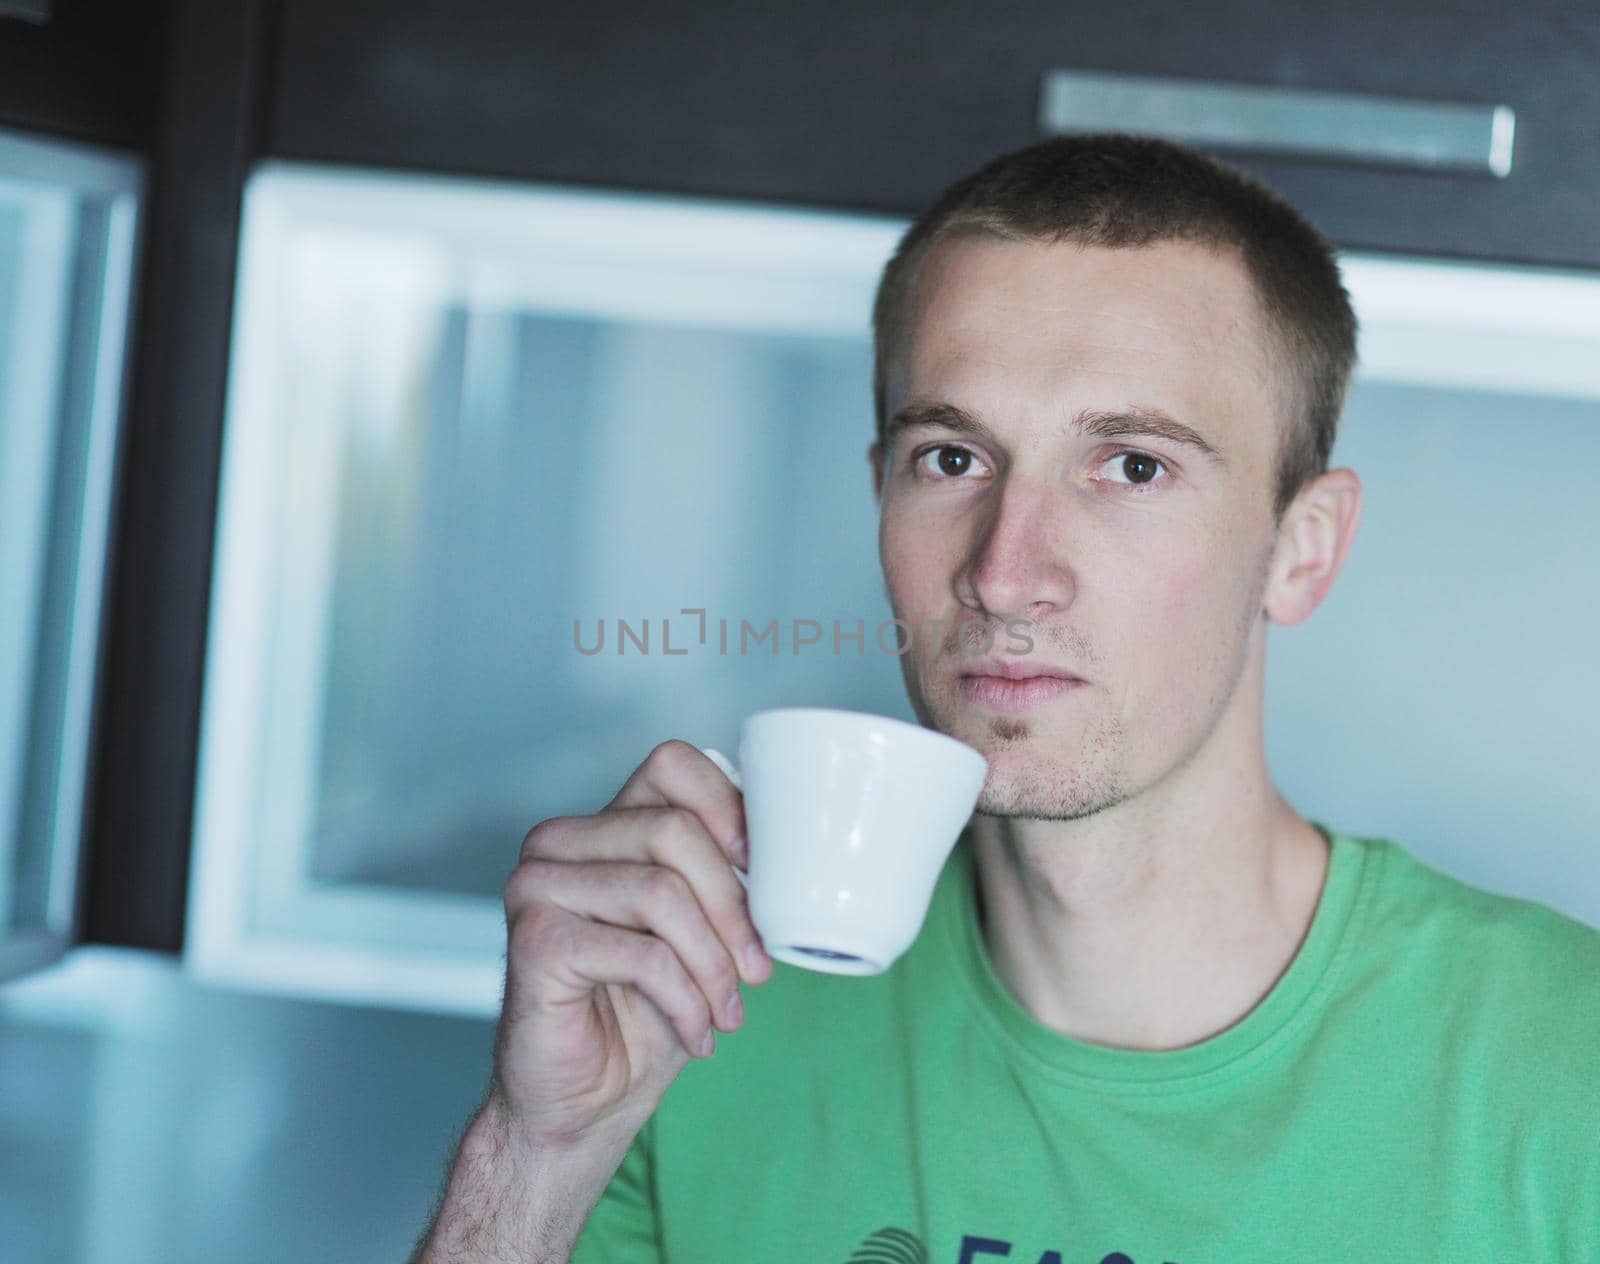 handsome young man drink fresh morning coffee from white cup